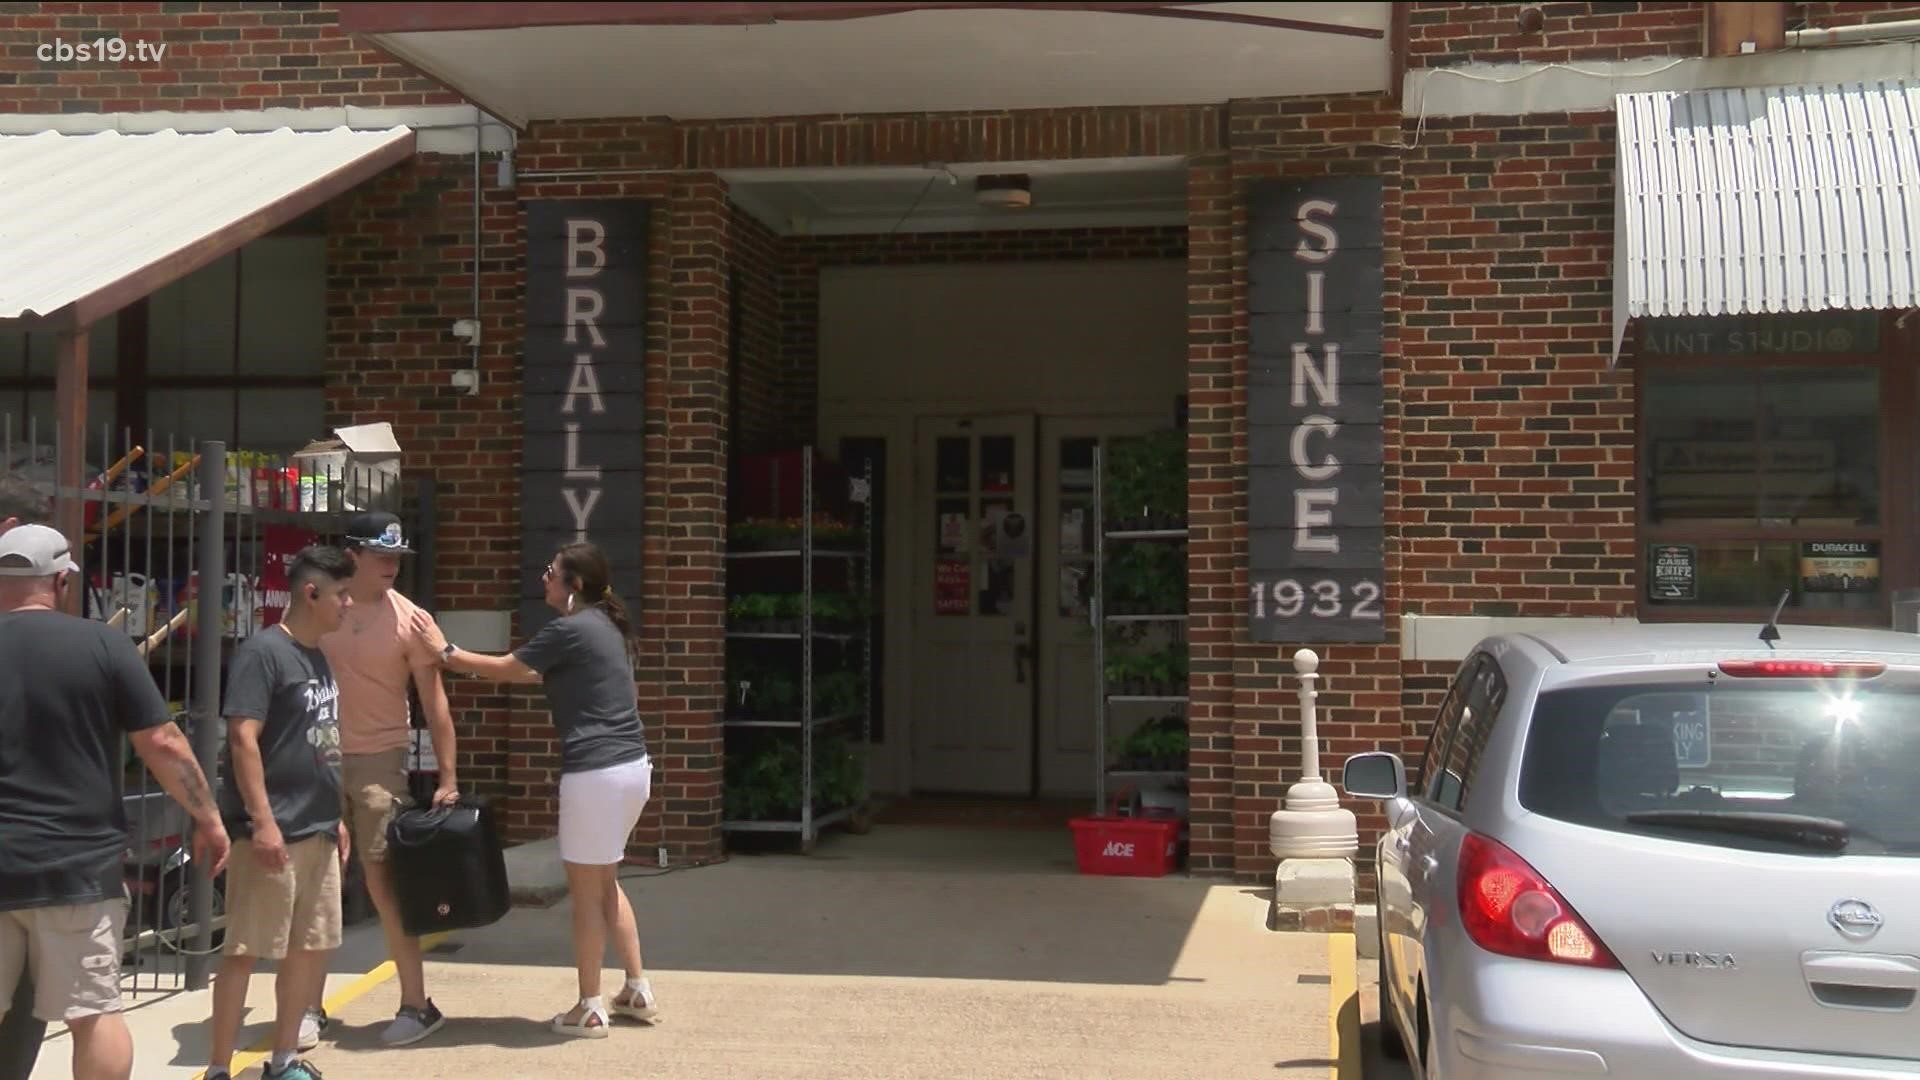 Five generations of the Braly family have managed this successful local store in a beloved elementary school.